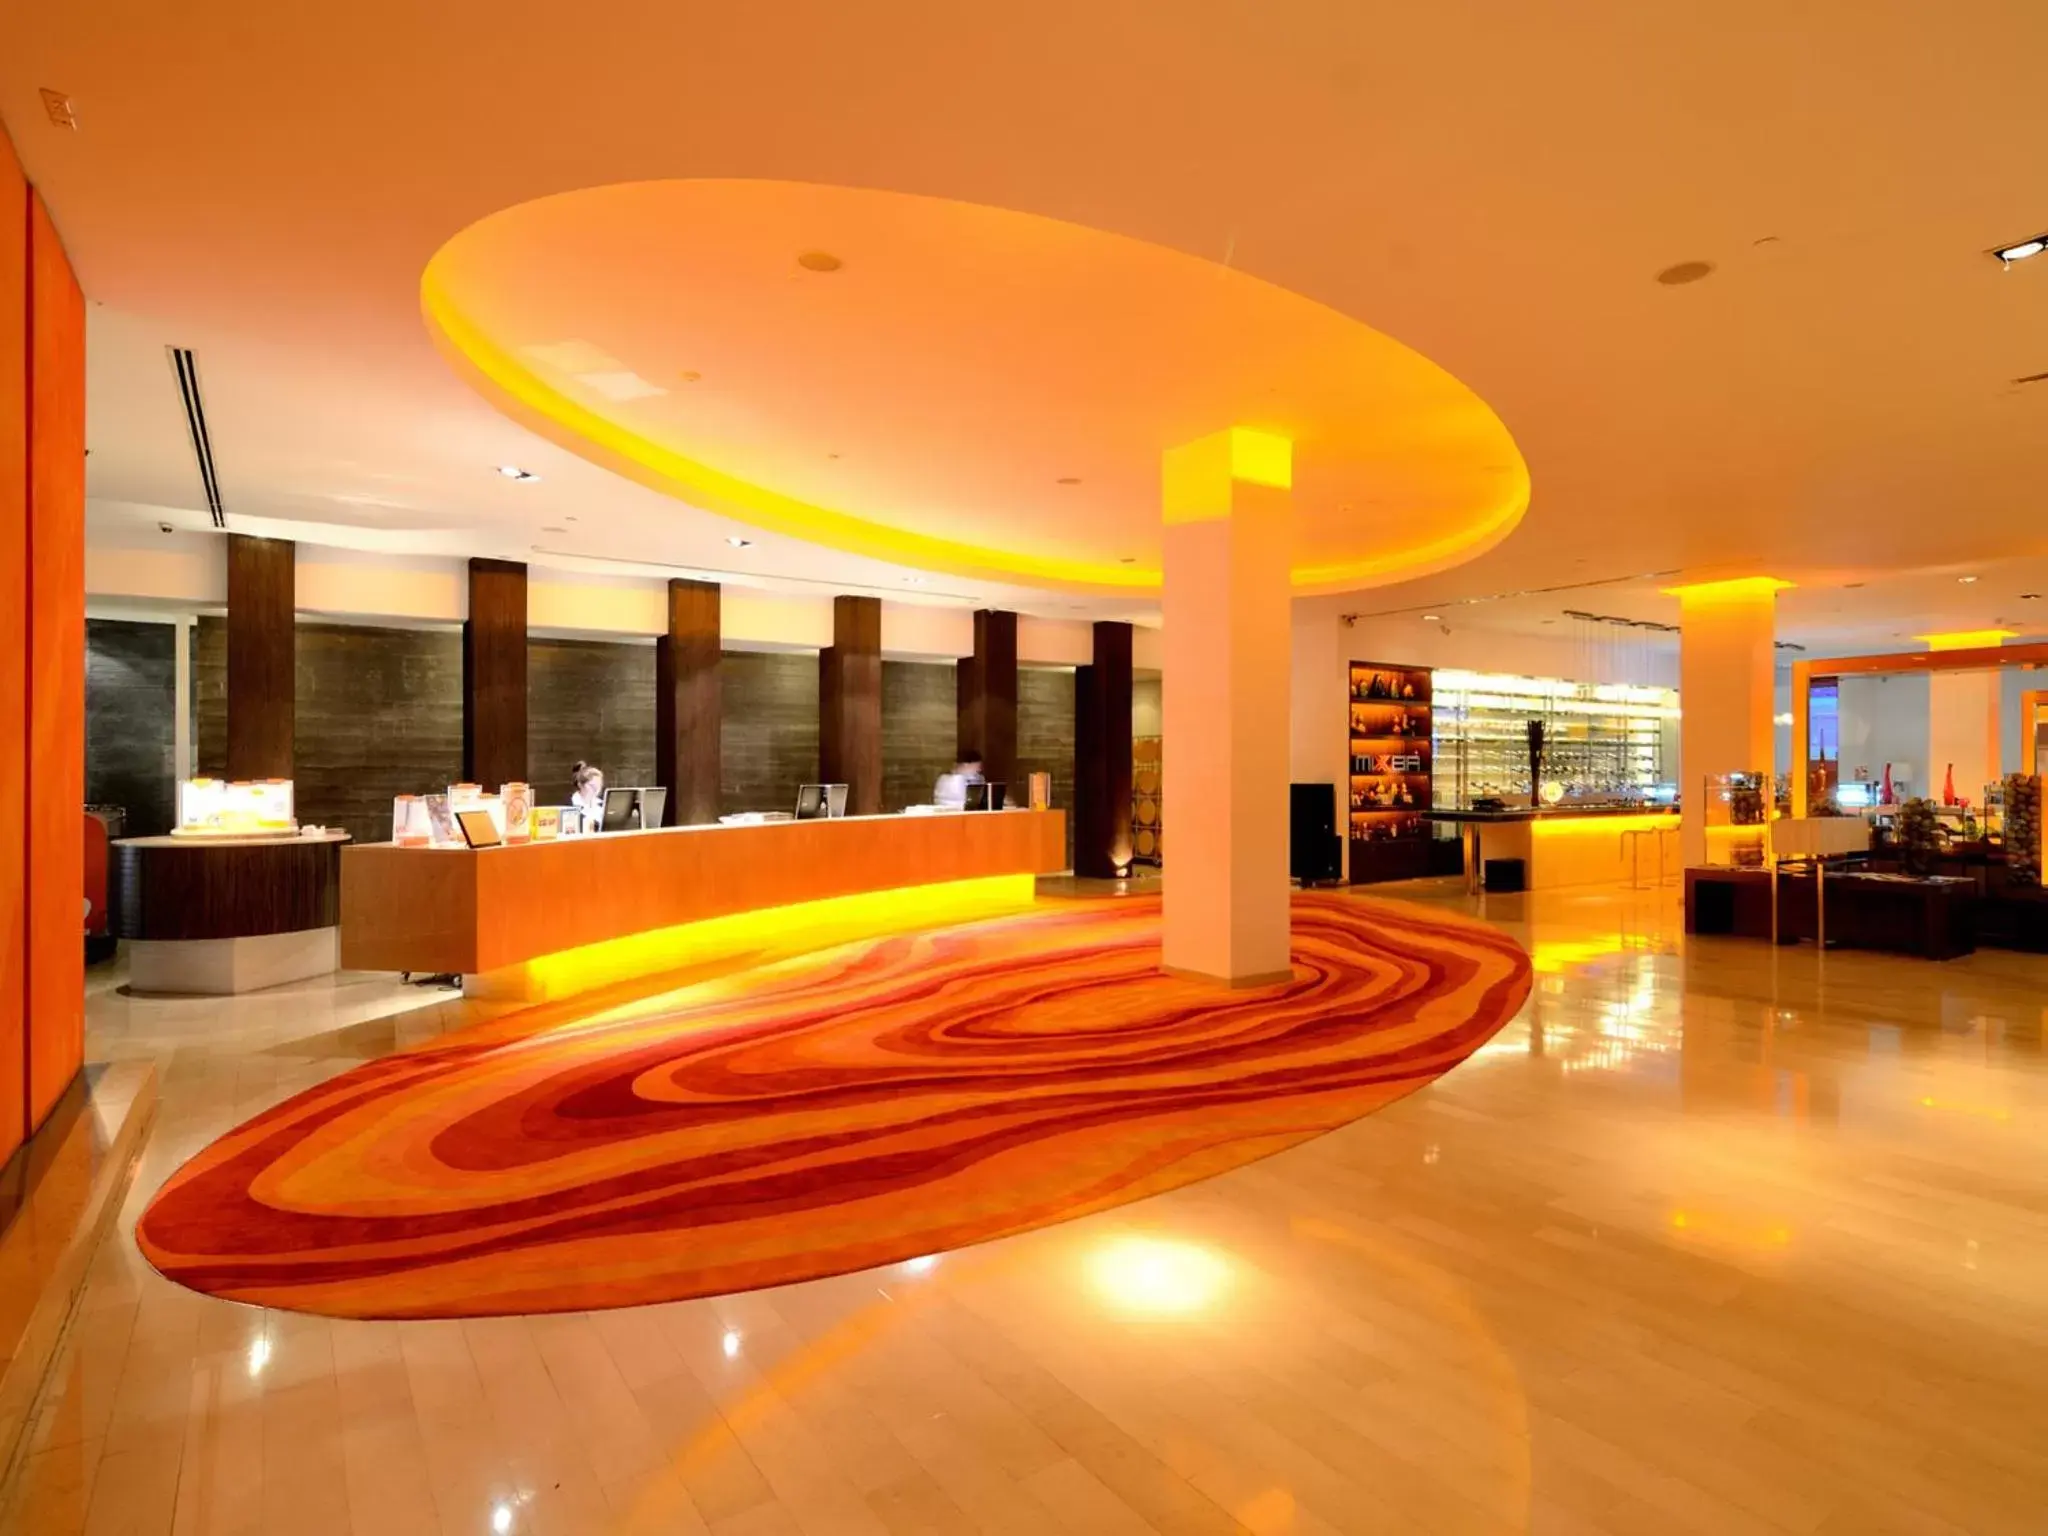 Lobby or reception in dusitD2 Chiang Mai